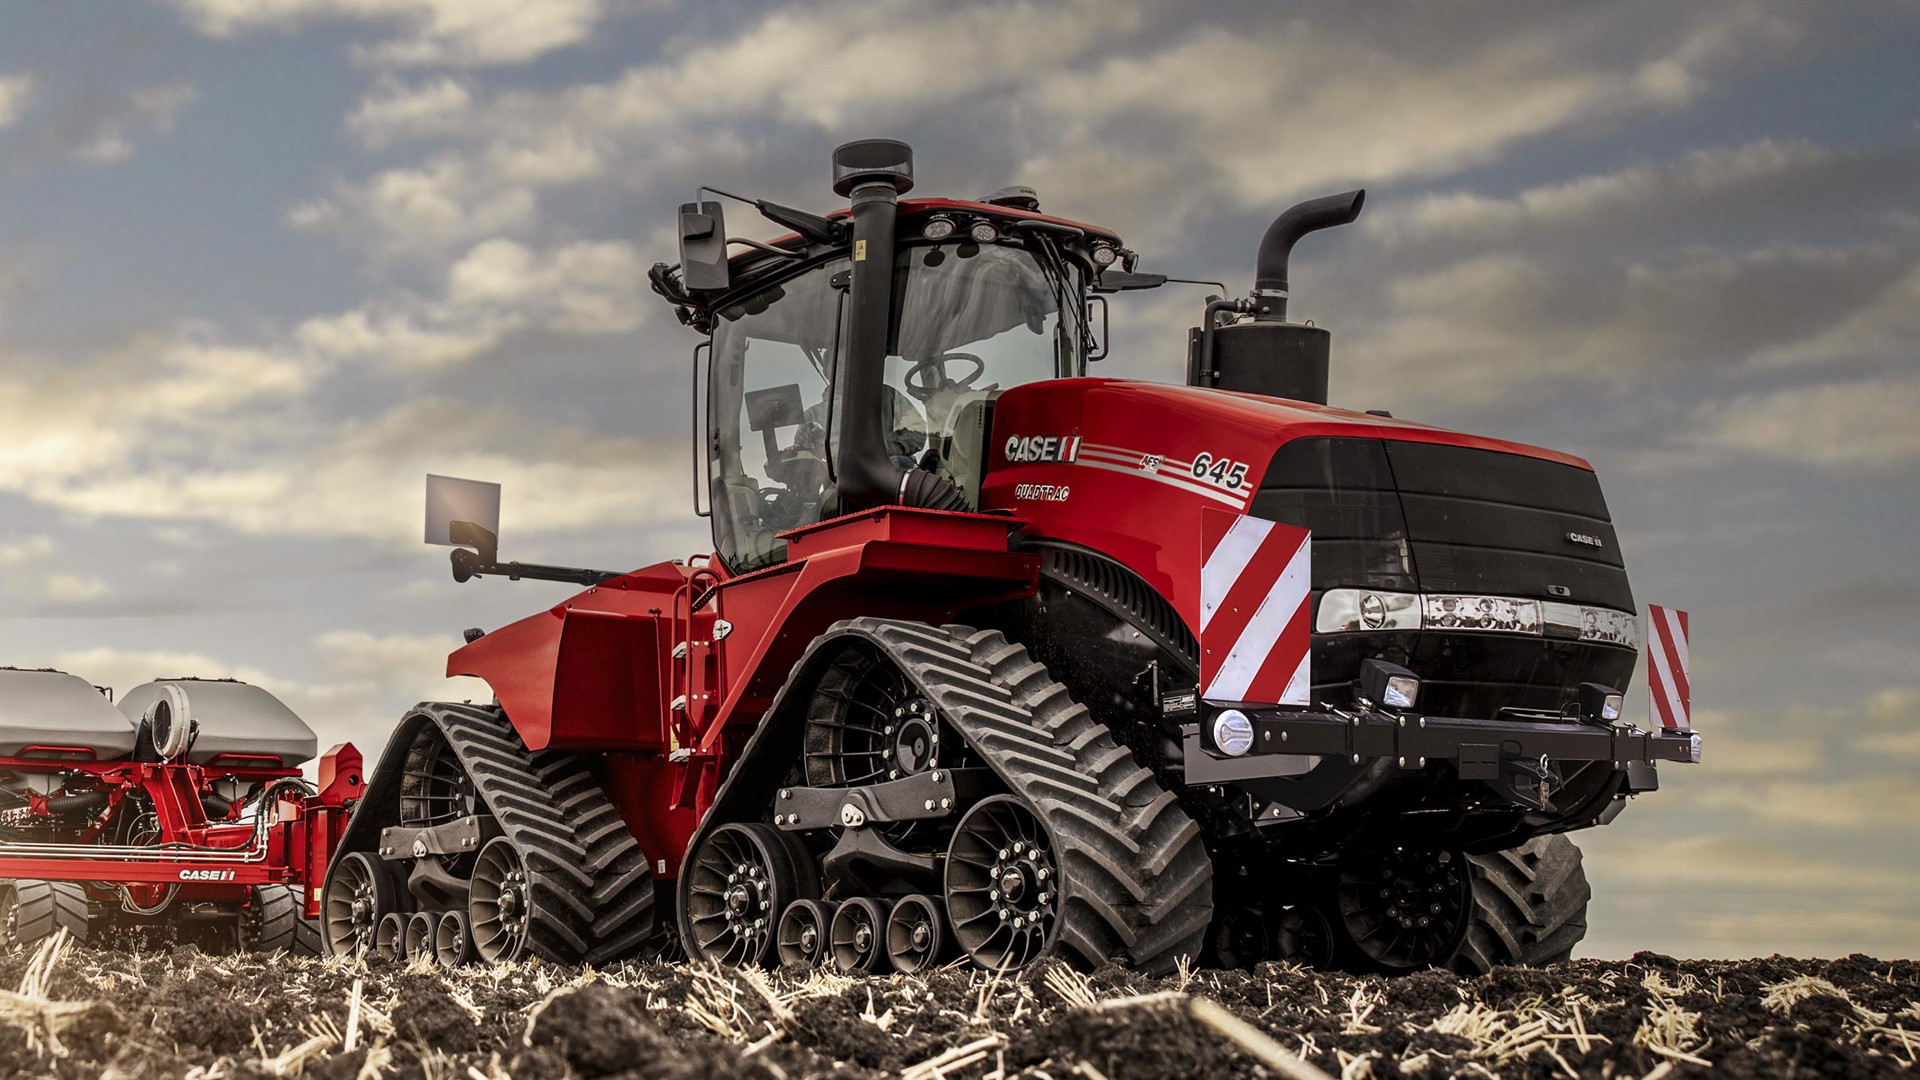 CASE IH INTRODUCES NEW HIGH HORSEPOWER QUADTRAC AND STEIGER TRACTORS